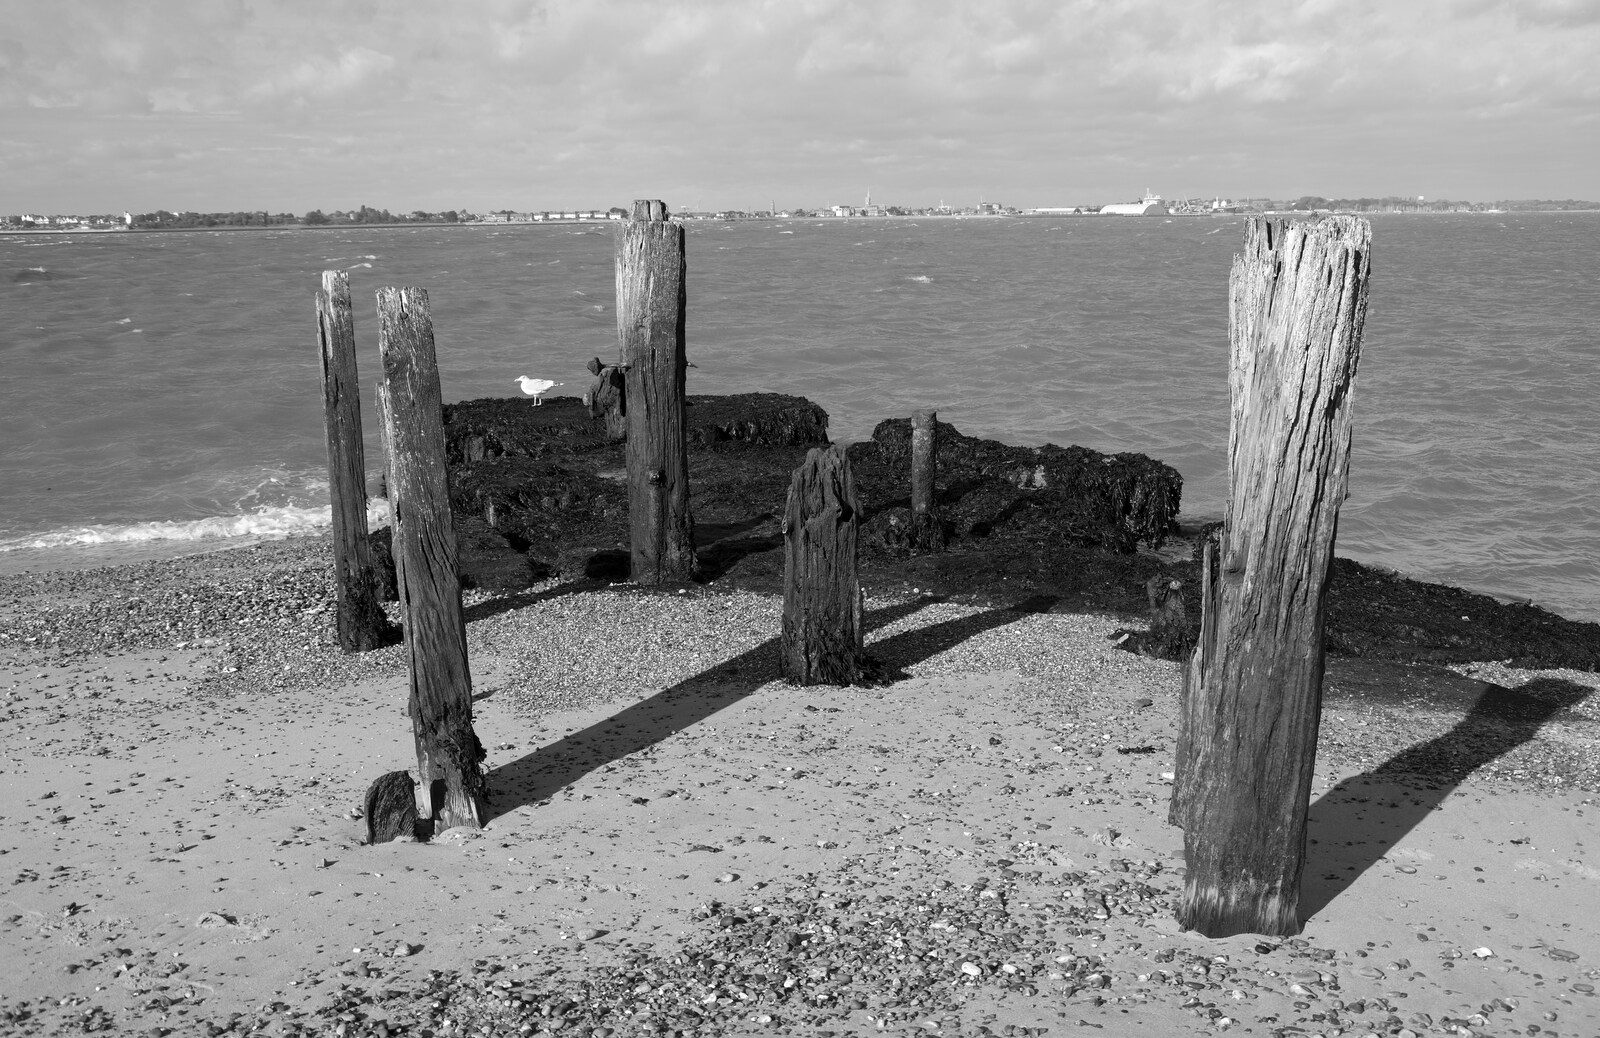 A Postcard from Felixstowe, Suffolk - 5th October 2022: A collection of wooden stumps on the shore